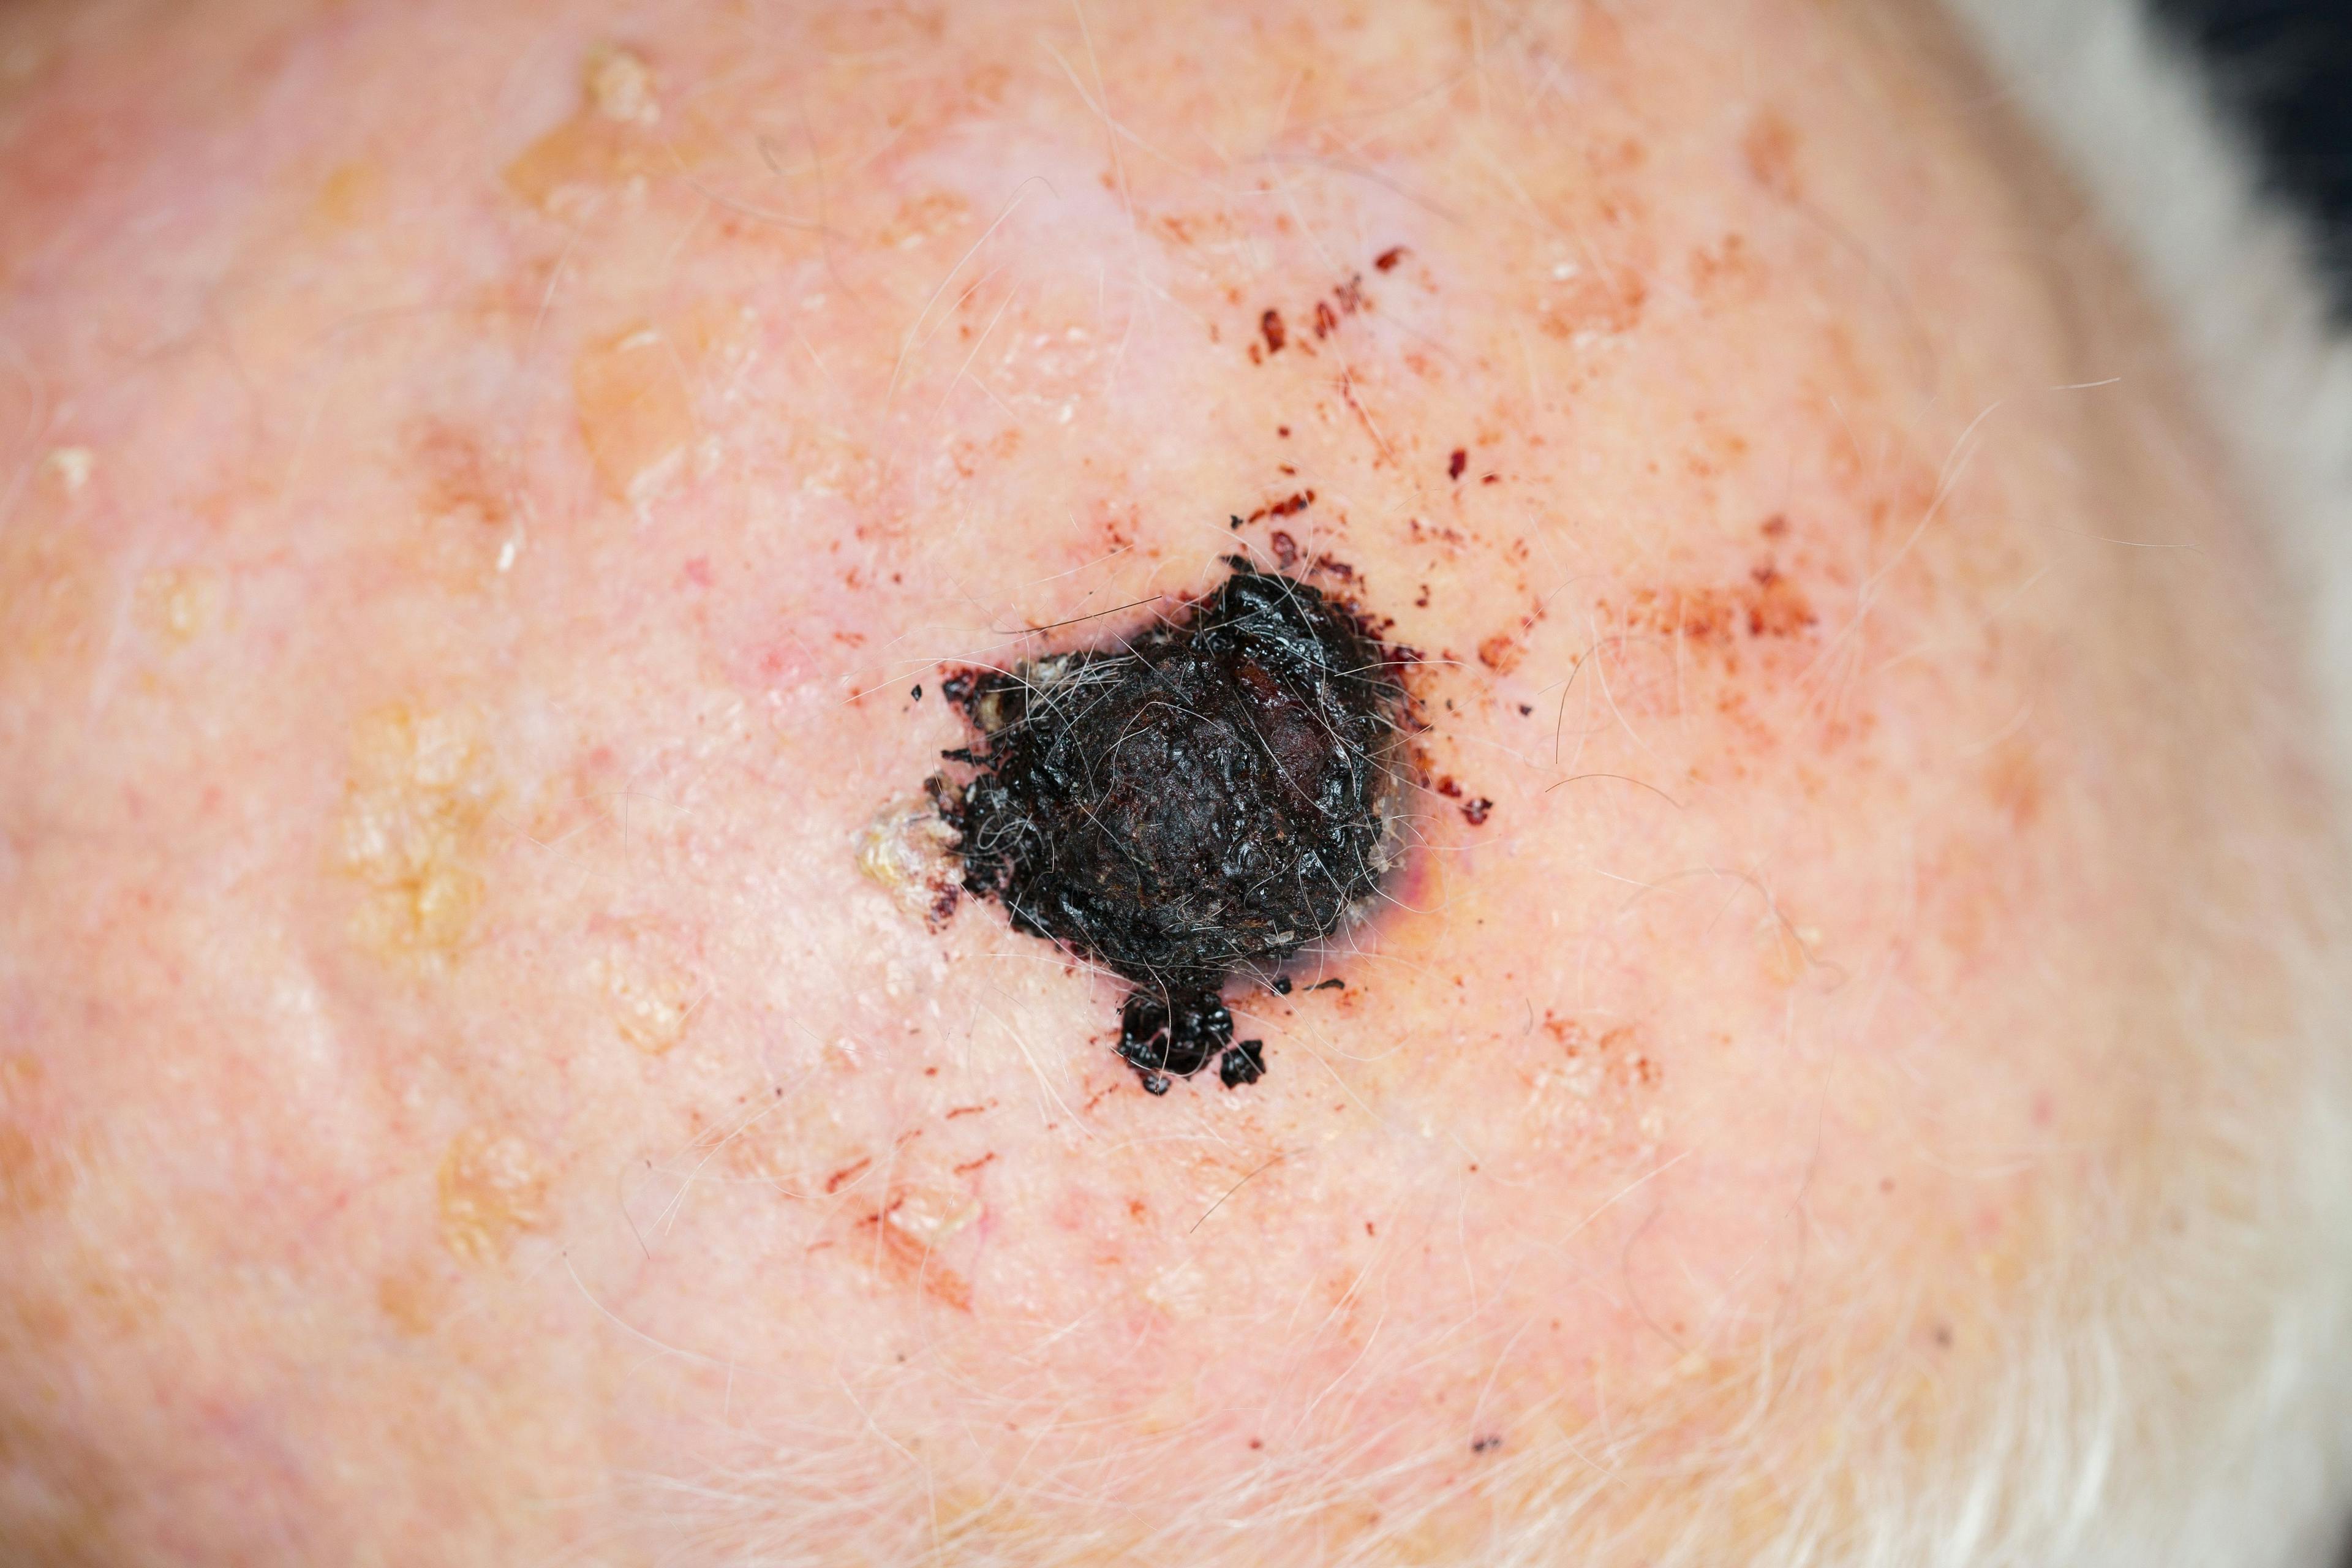 Higher Treatment, Health Care Costs Associated With Advanced Melanomas